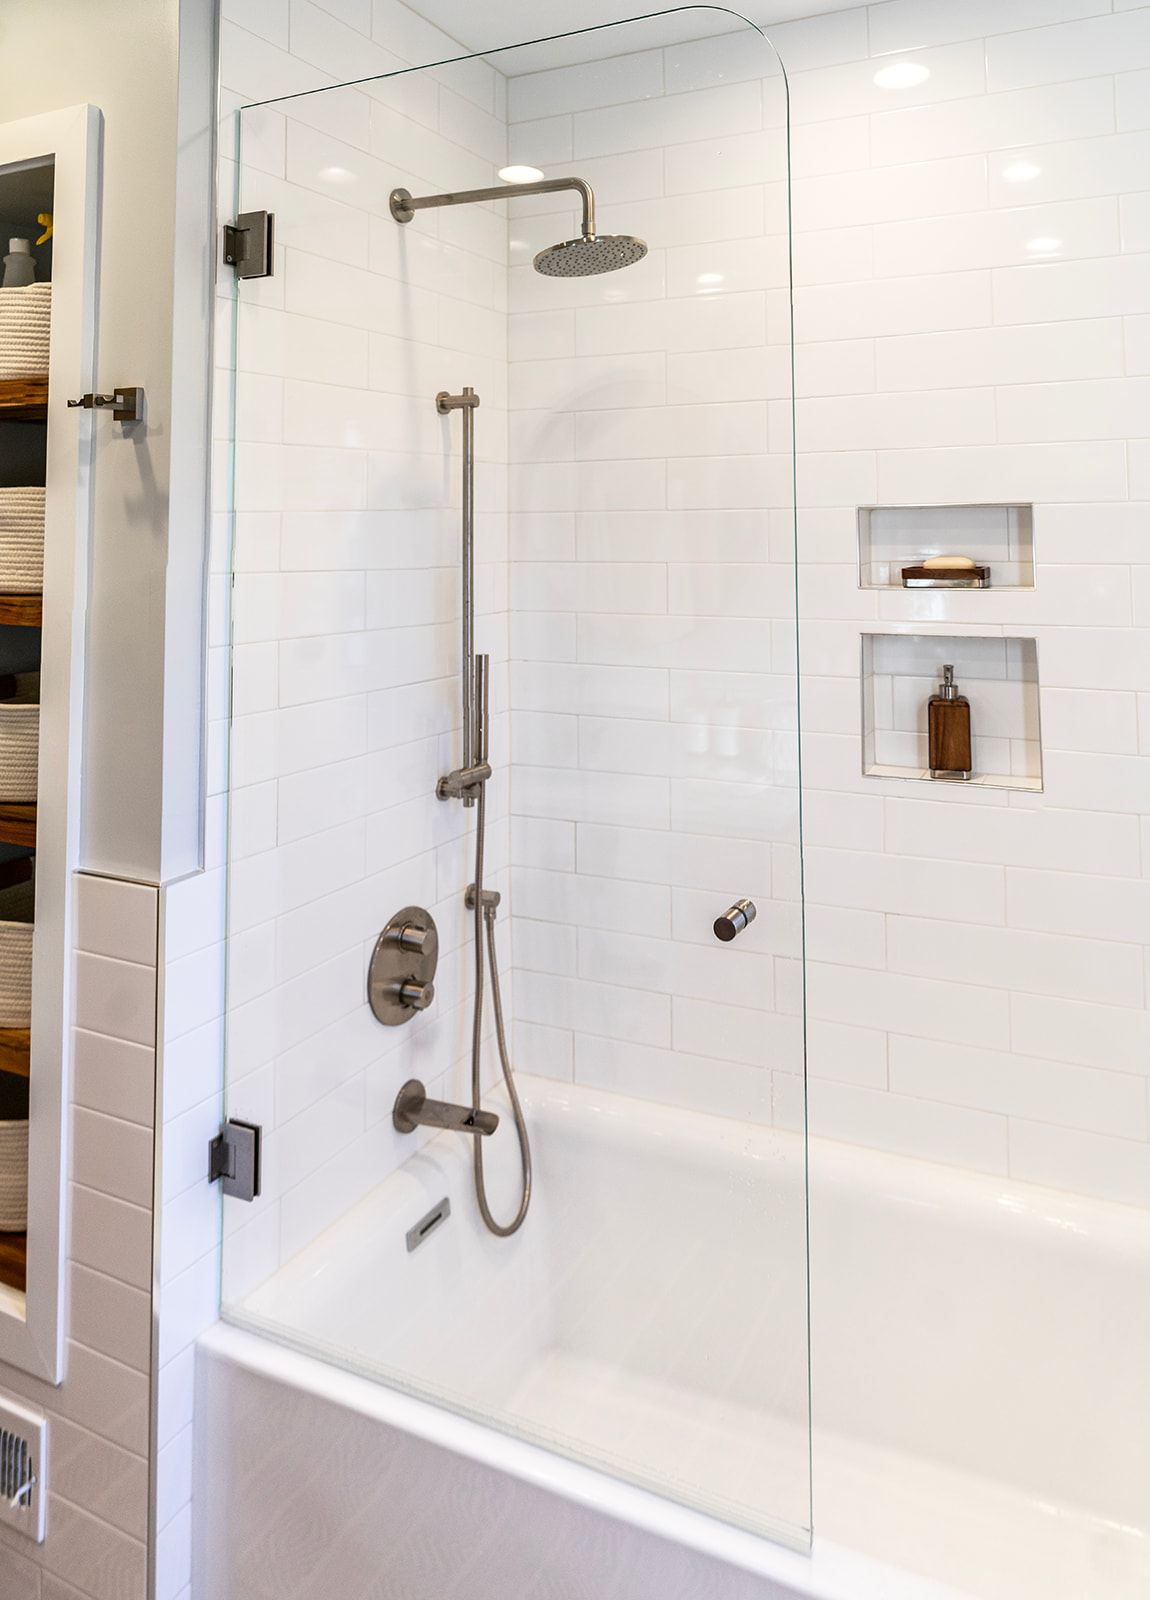 A Bathroom Renovation That's Simply Perfect — The English Contractor